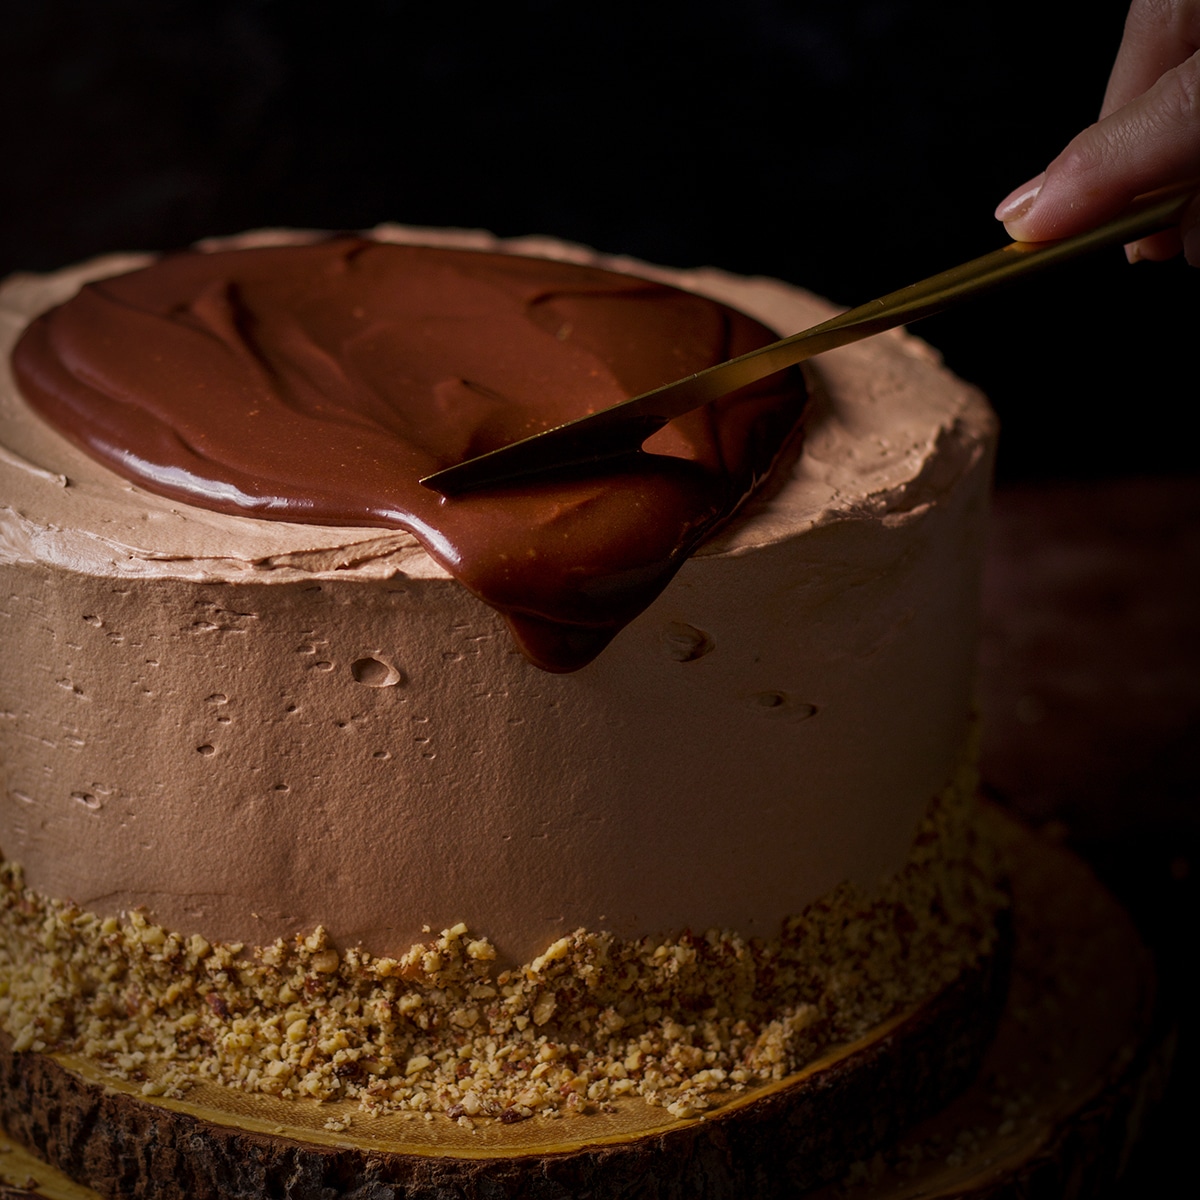 Someone using a knife to spread dark chocolate ganache over the top of a chocolate truffle cake.